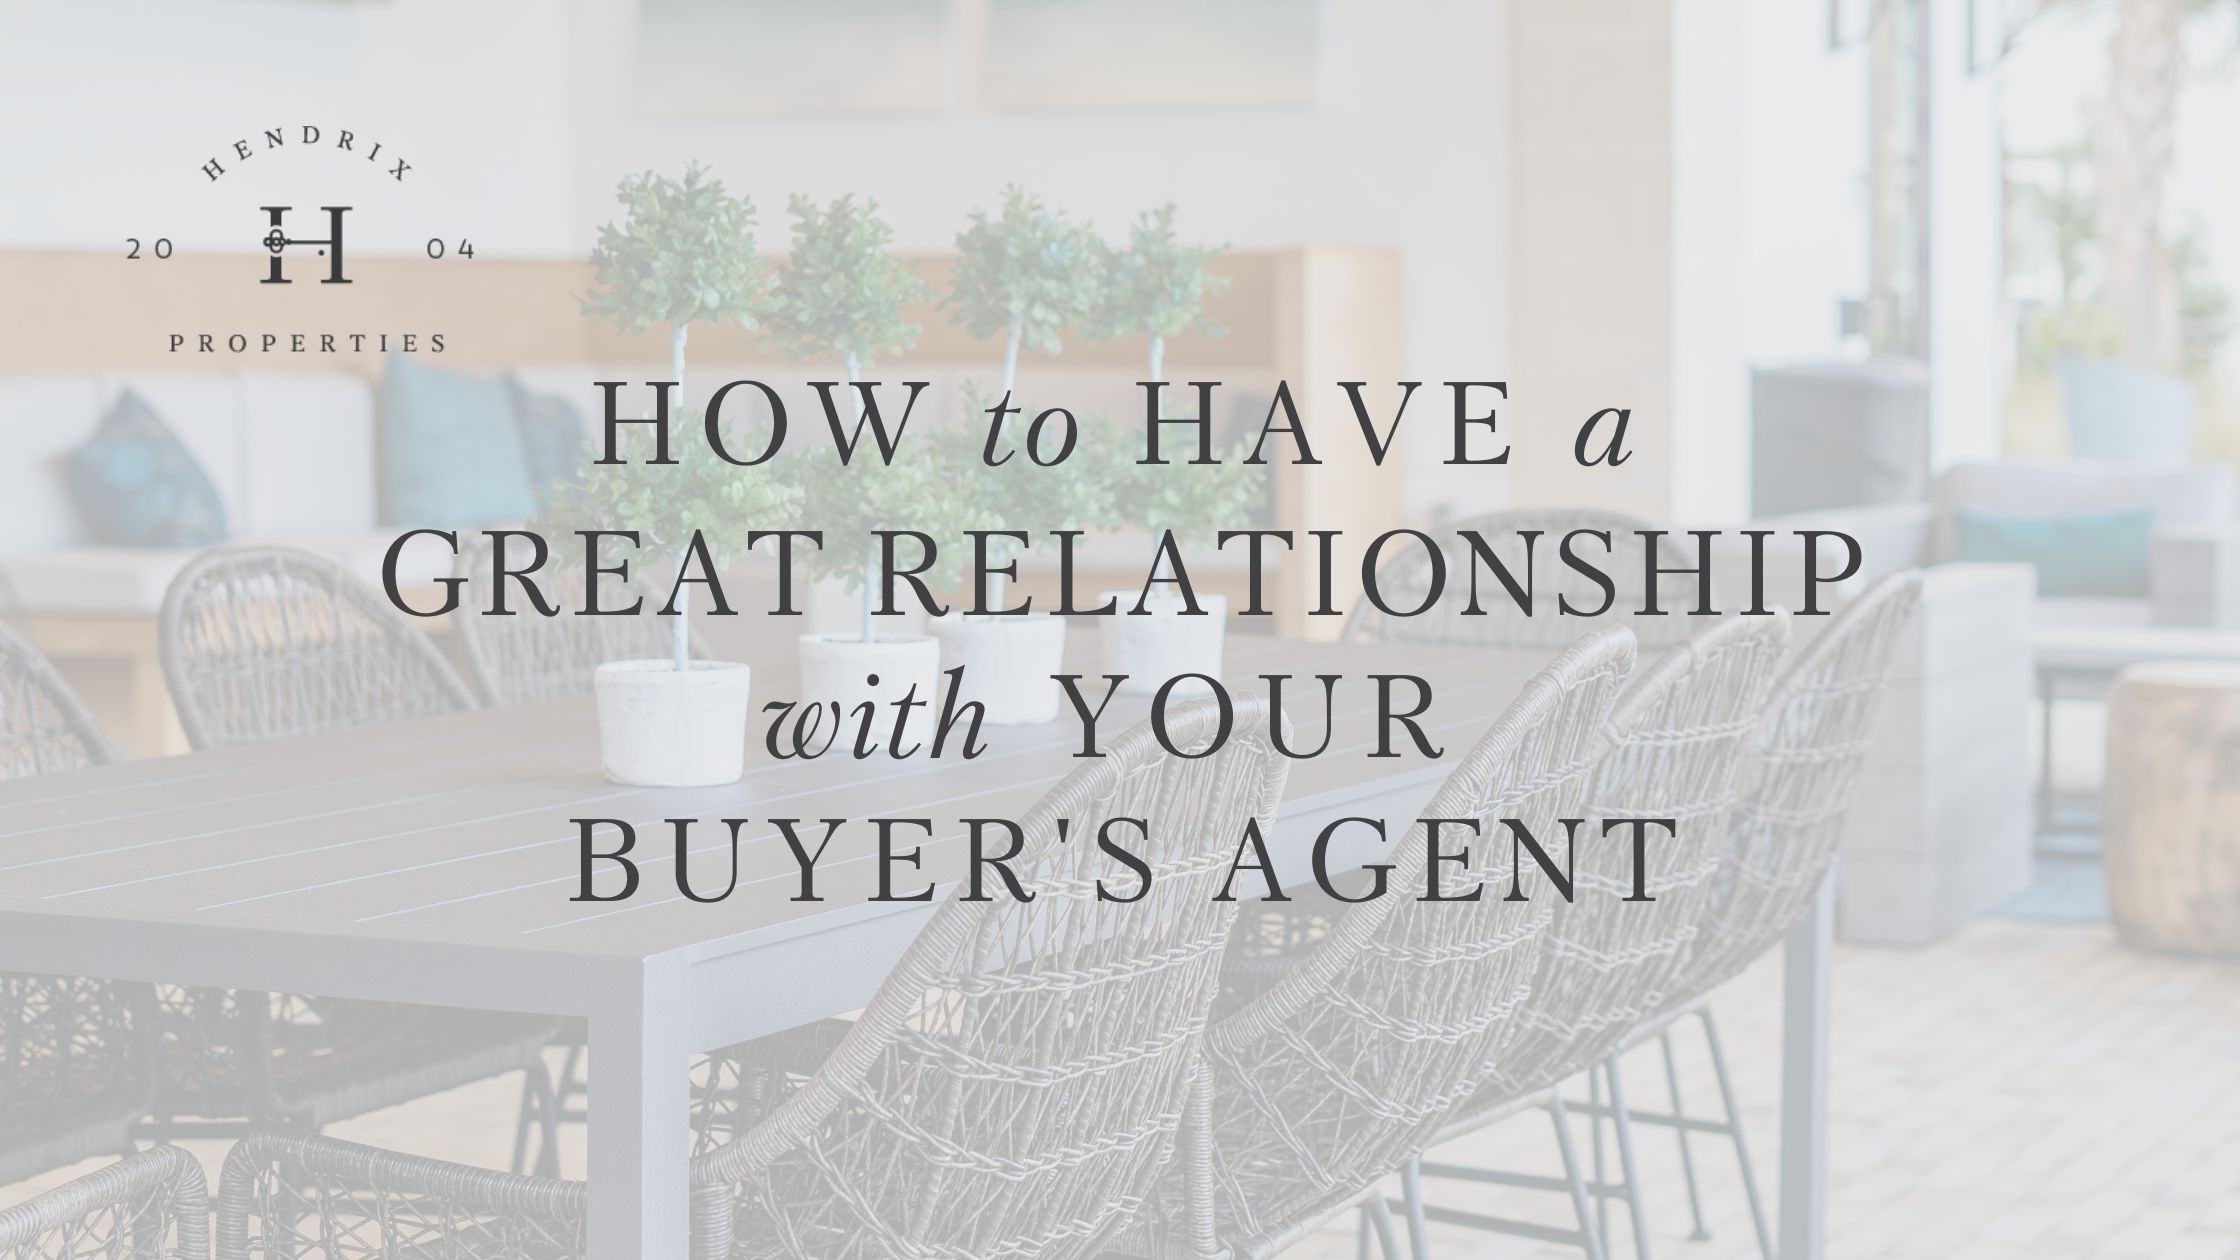 How to have a great relationship with your Buyers Agent